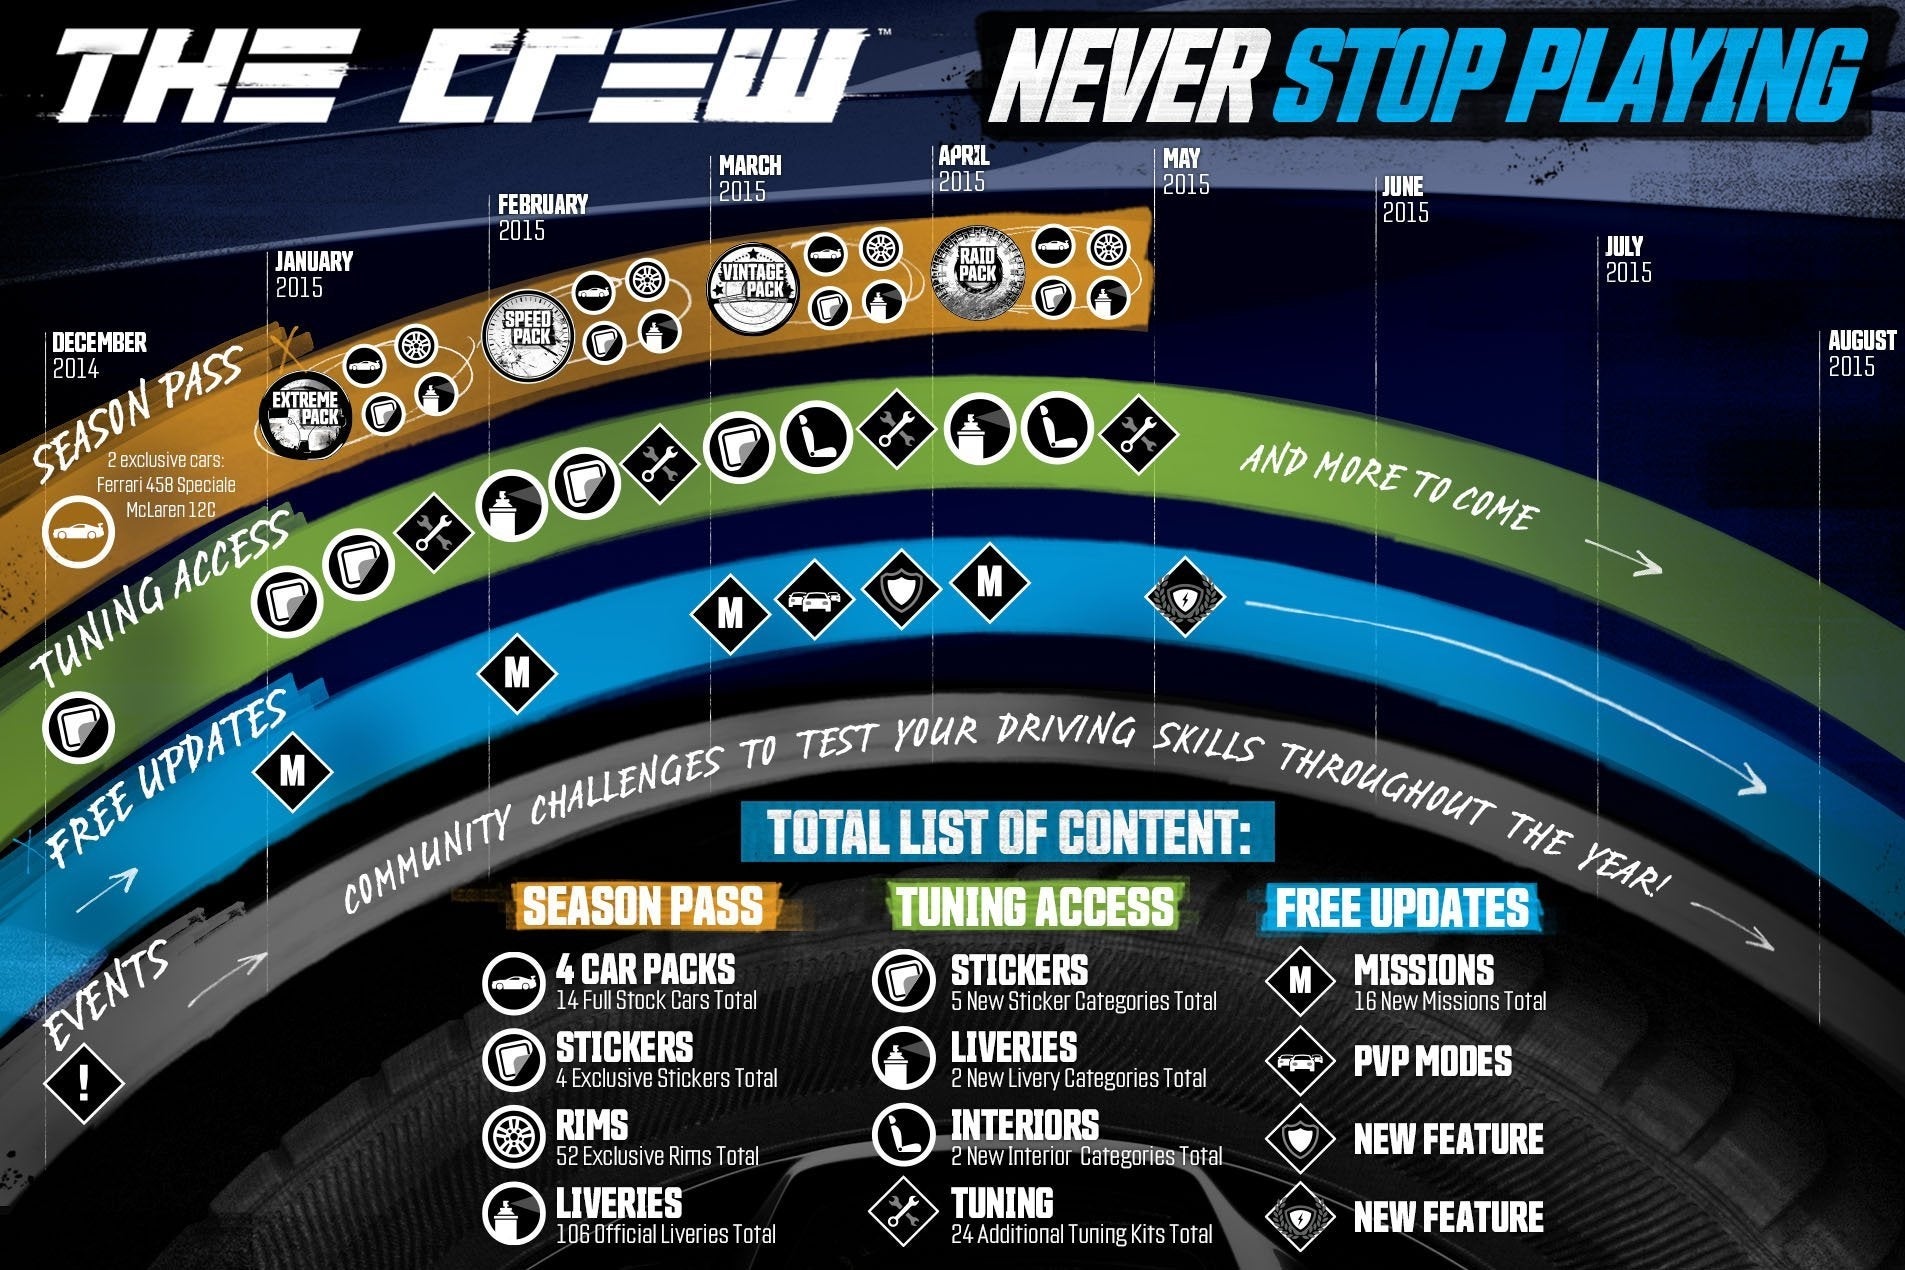 Image for Ubisoft details The Crew's £20 Season Pass